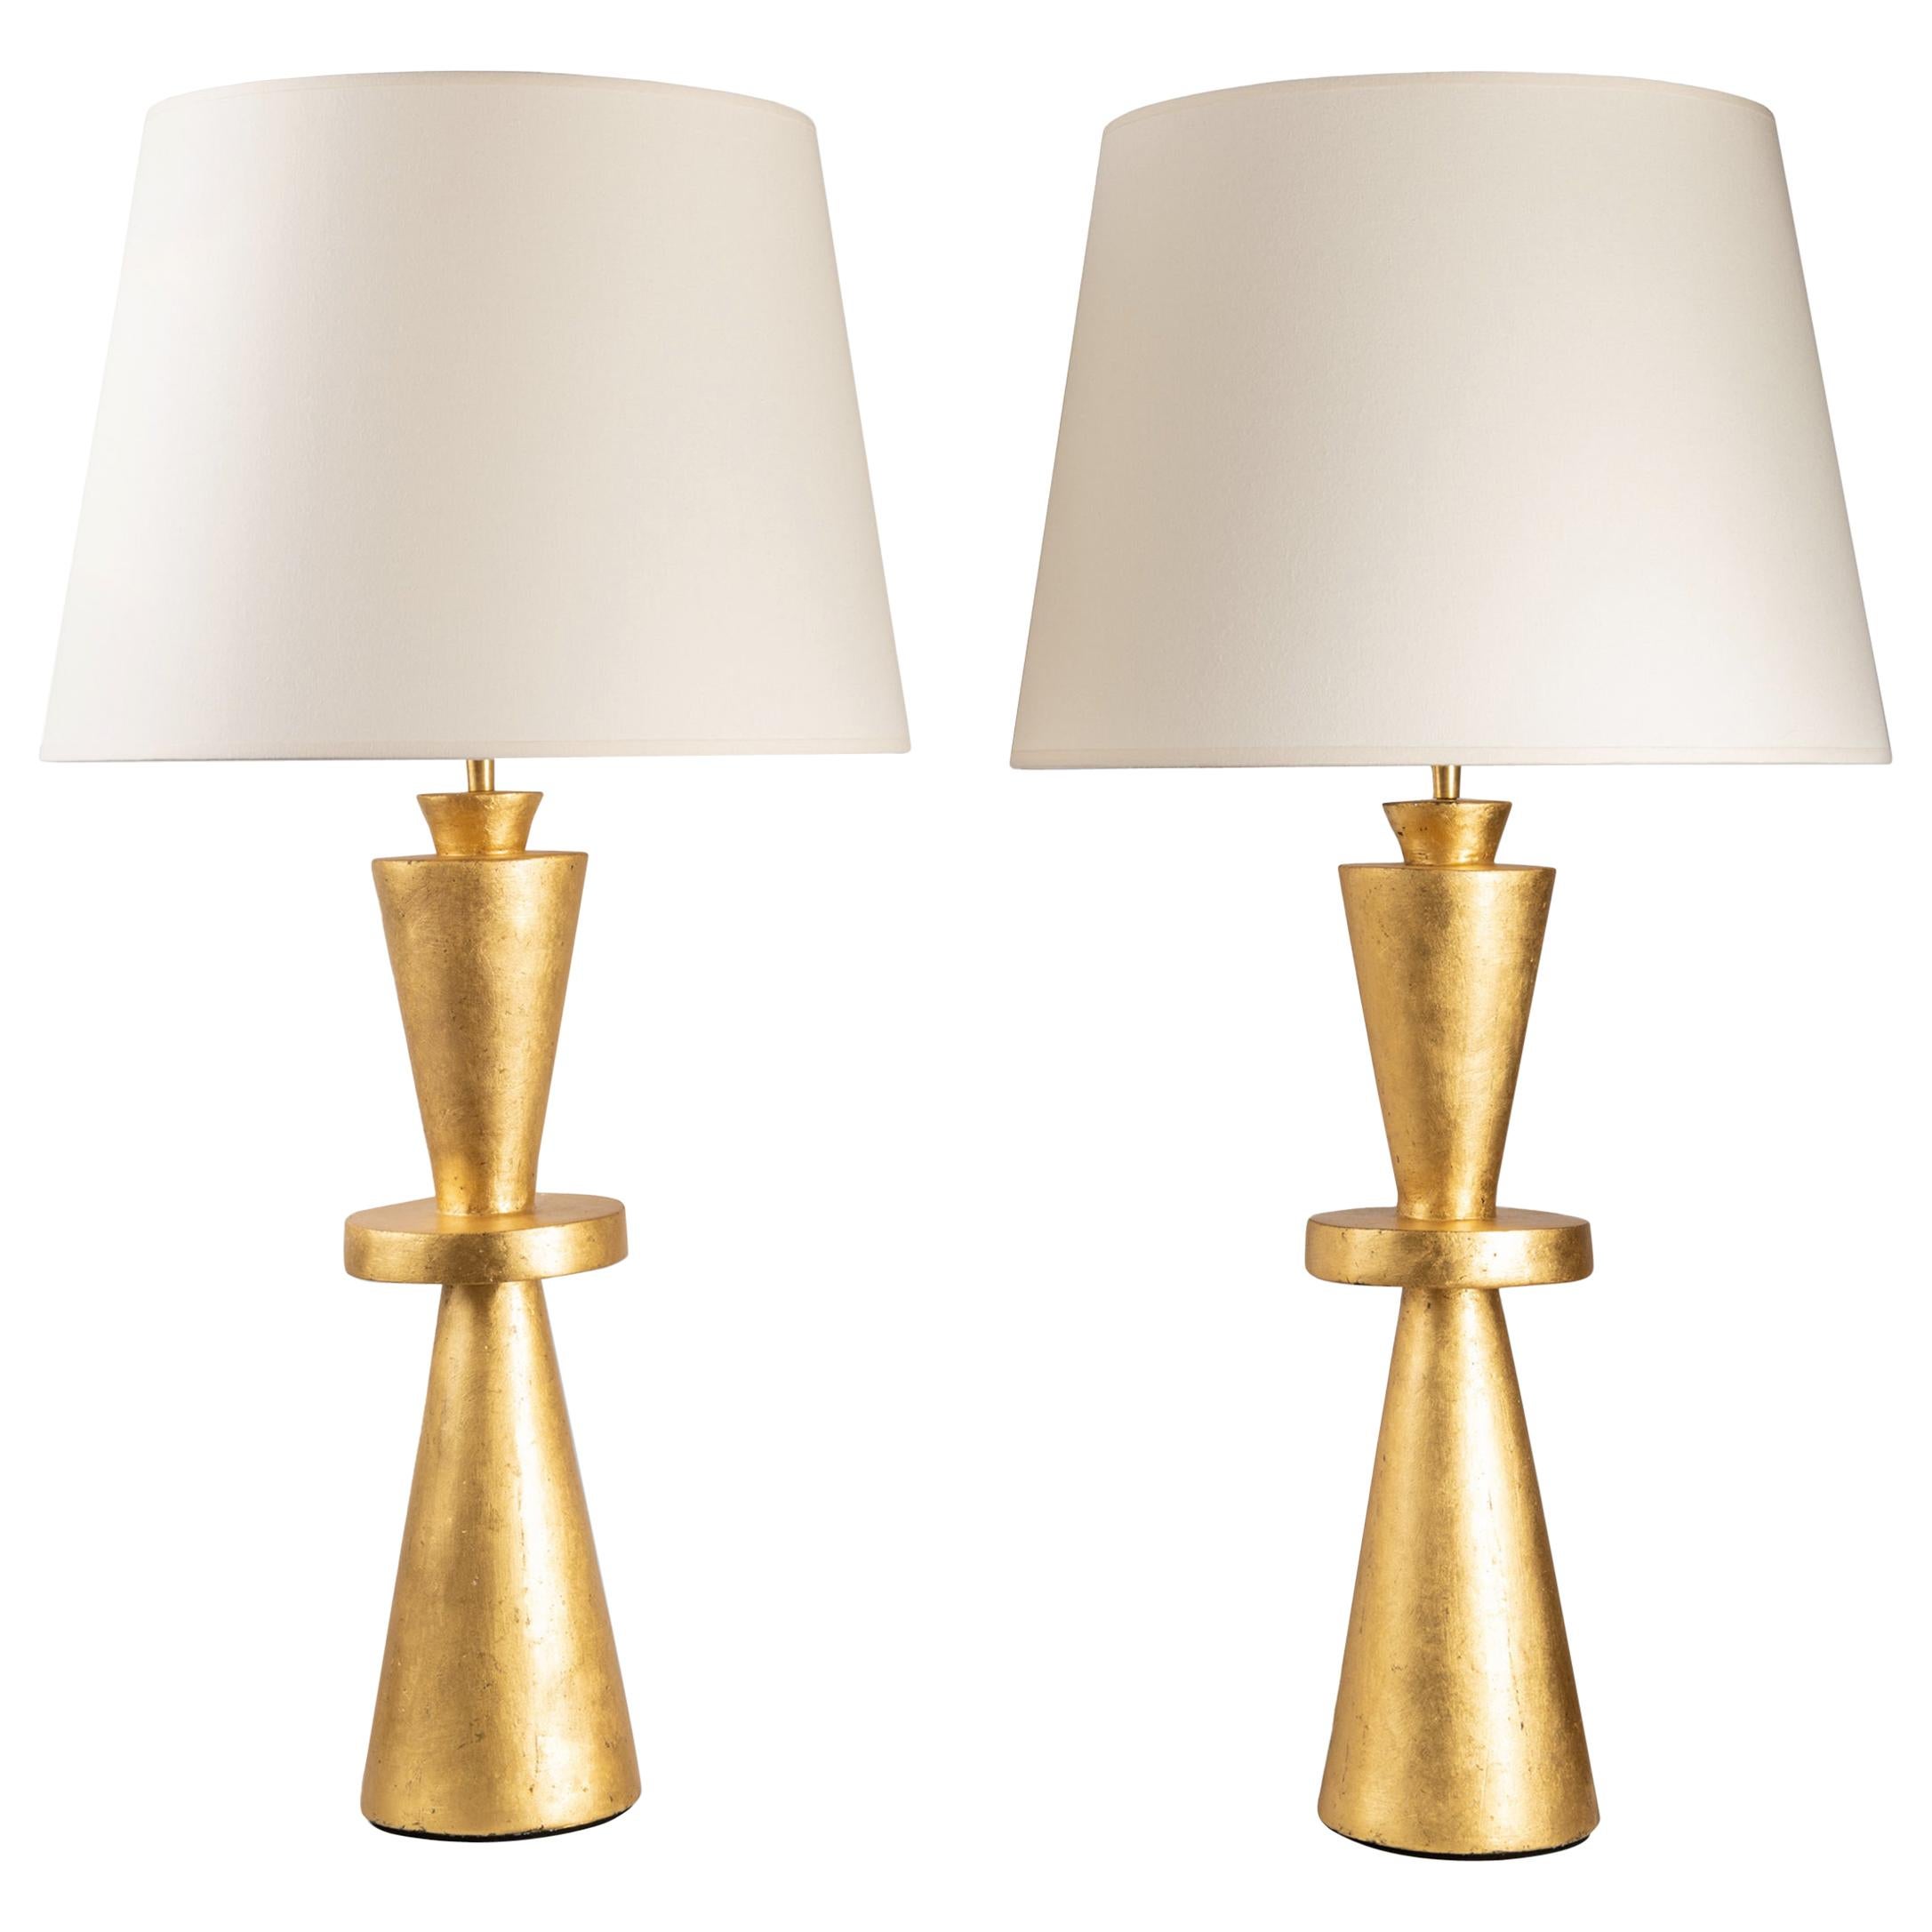 Pair of Gilt Plaster Tables Lamps 